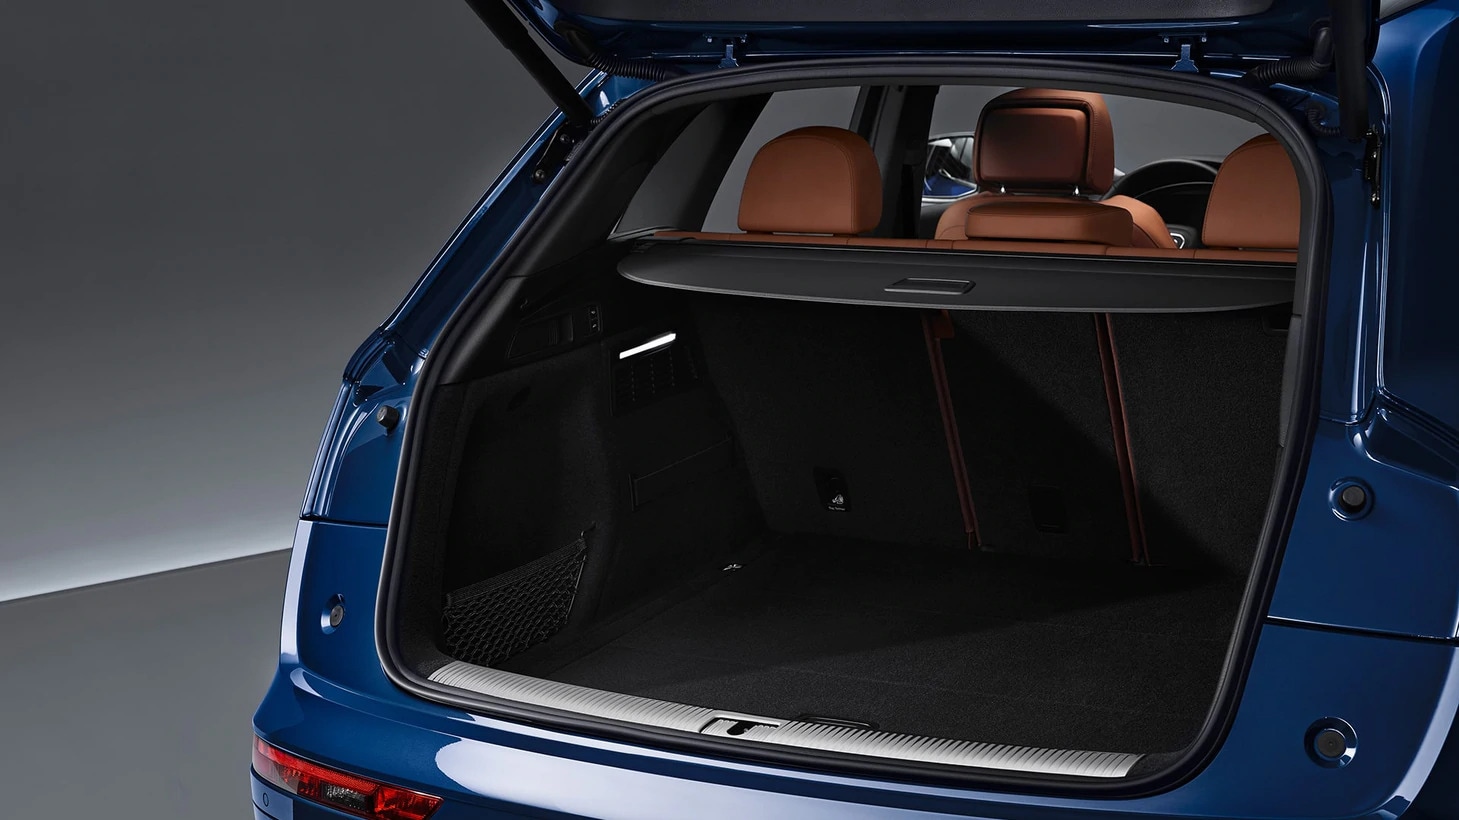 2021 Audi Q5 rear truck space with up to 53.5 cu. ft. capacity